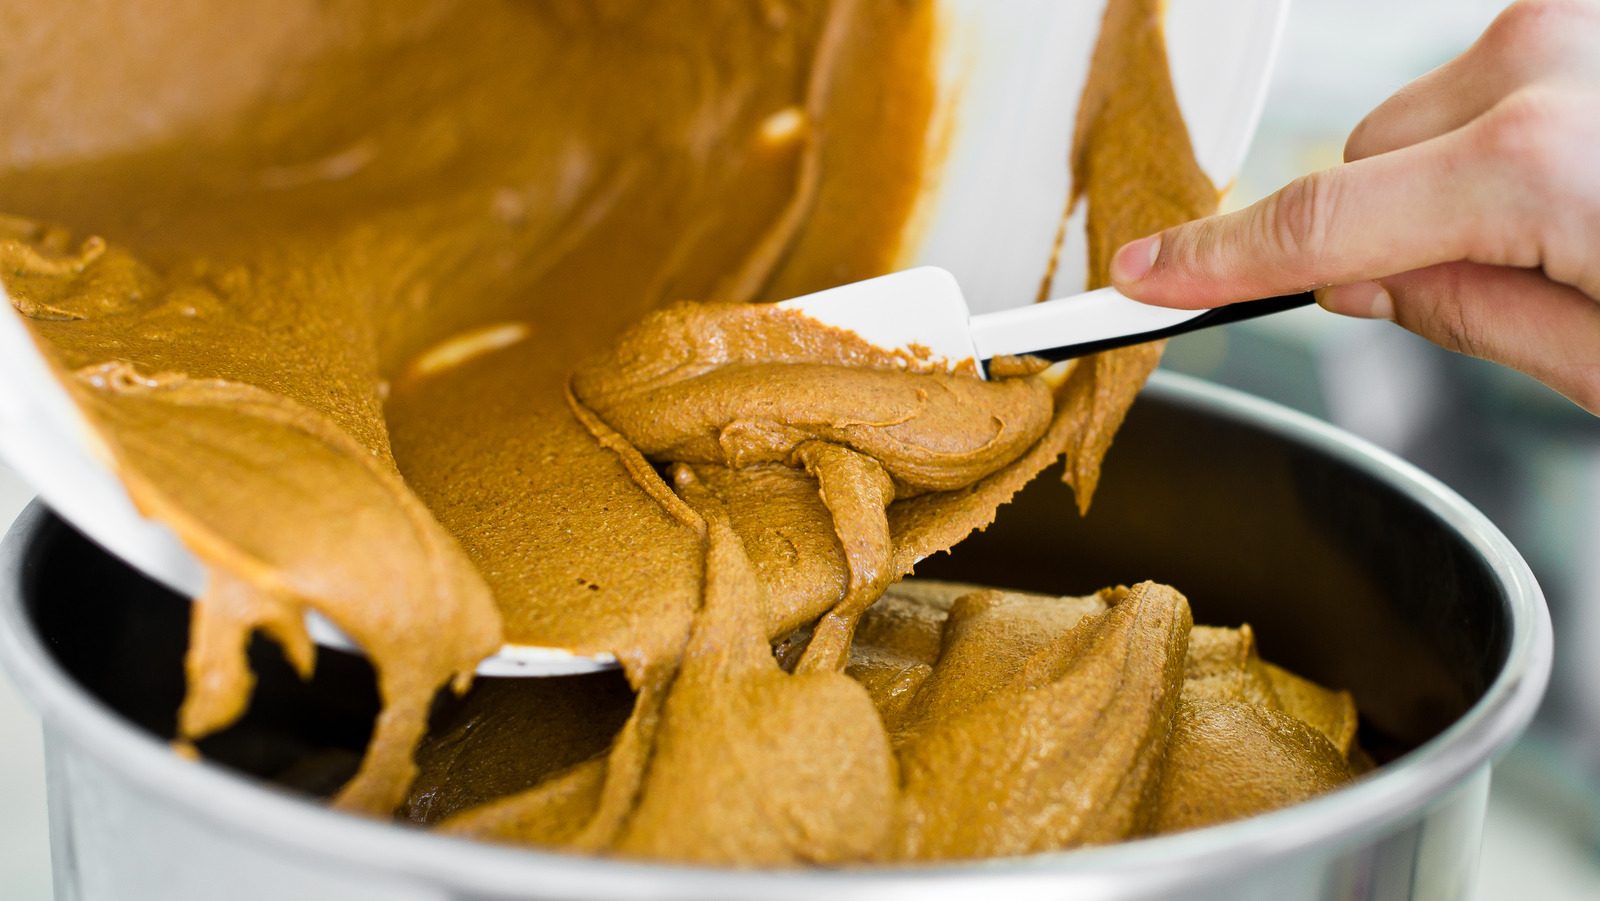 A Simple Trick to Avoid Stirring Natural Peanut Butter